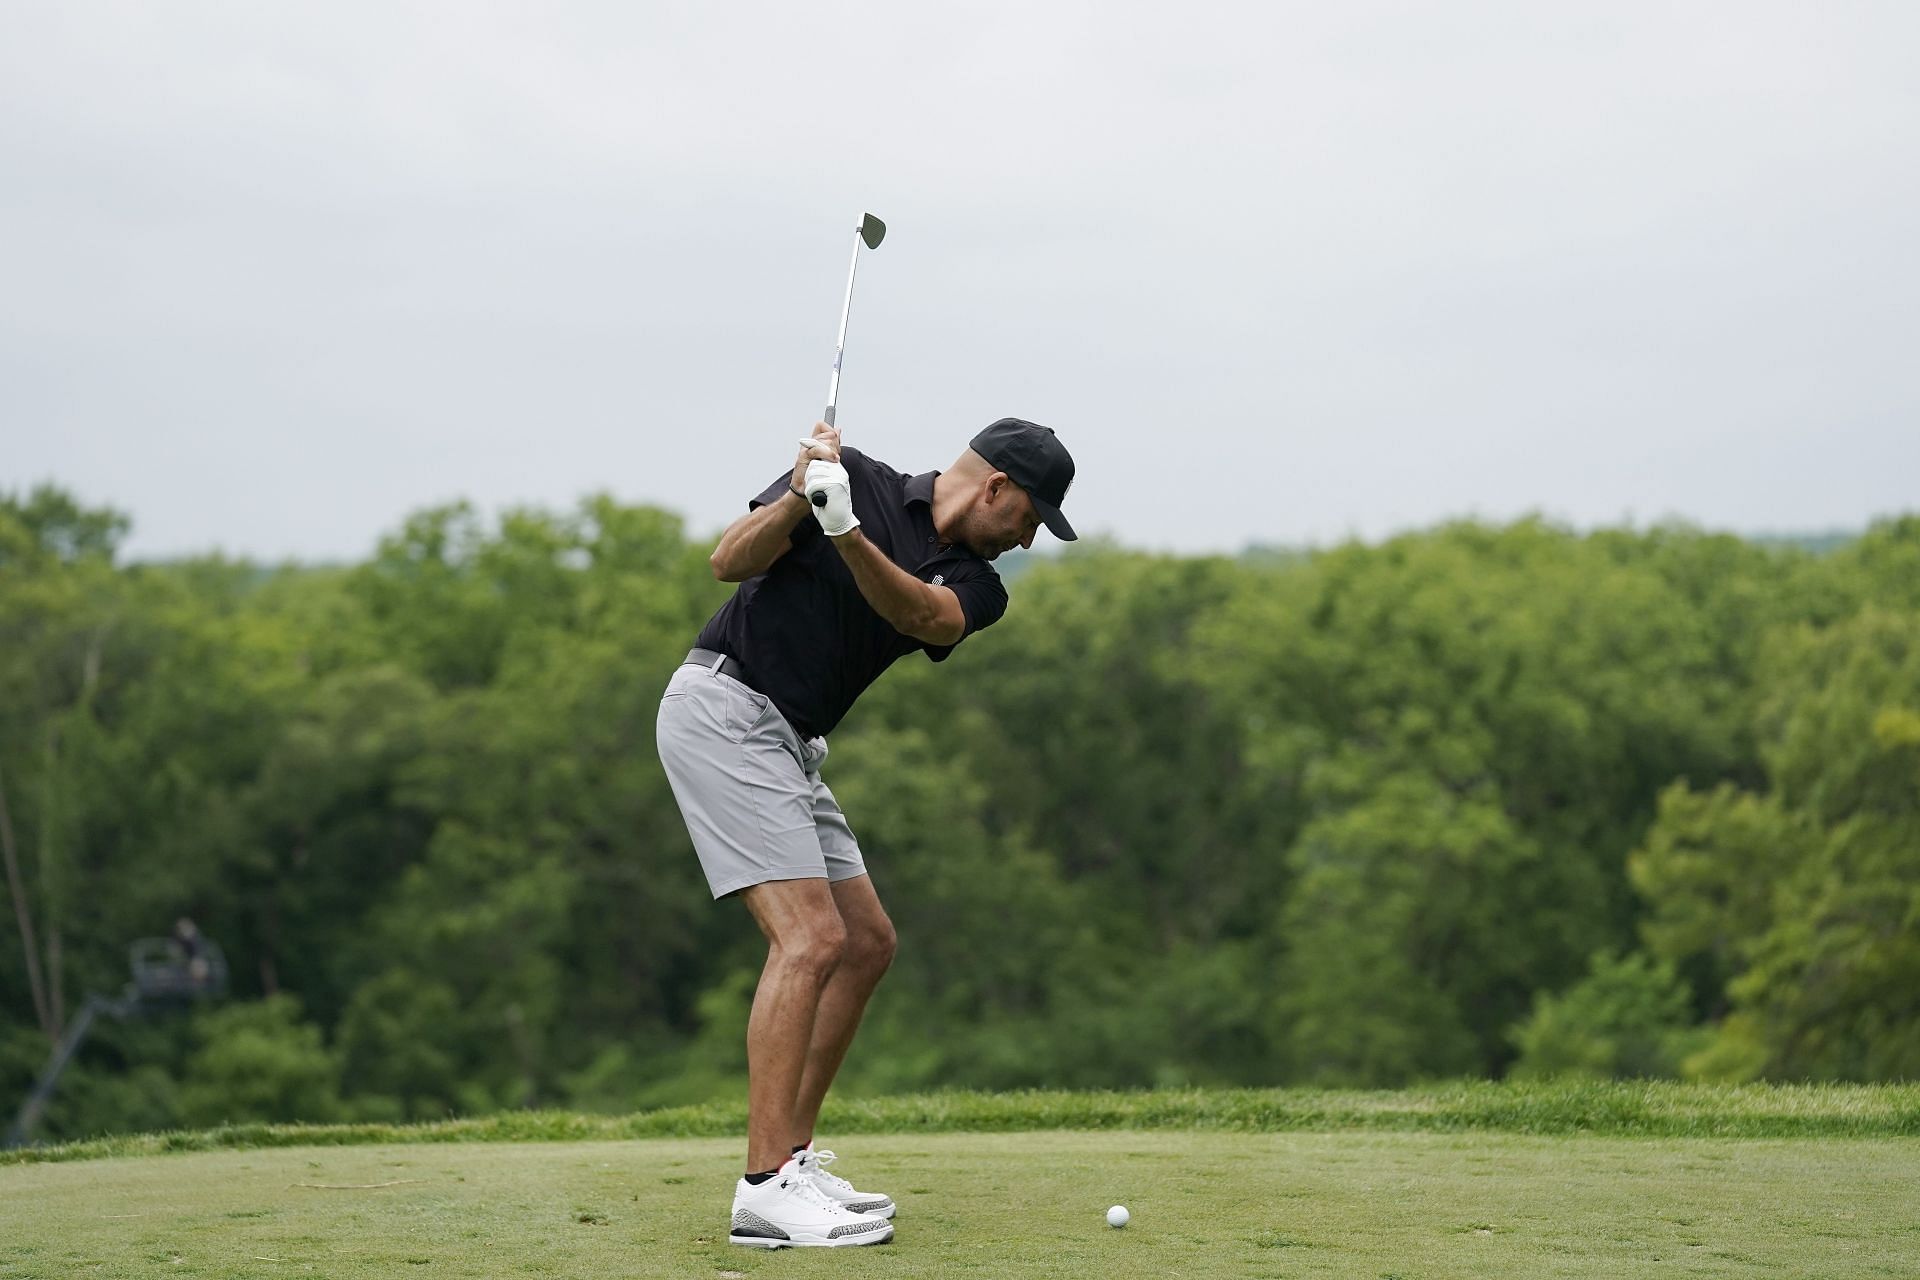 Derek Jeter participated in the American Family Insurance Championship.